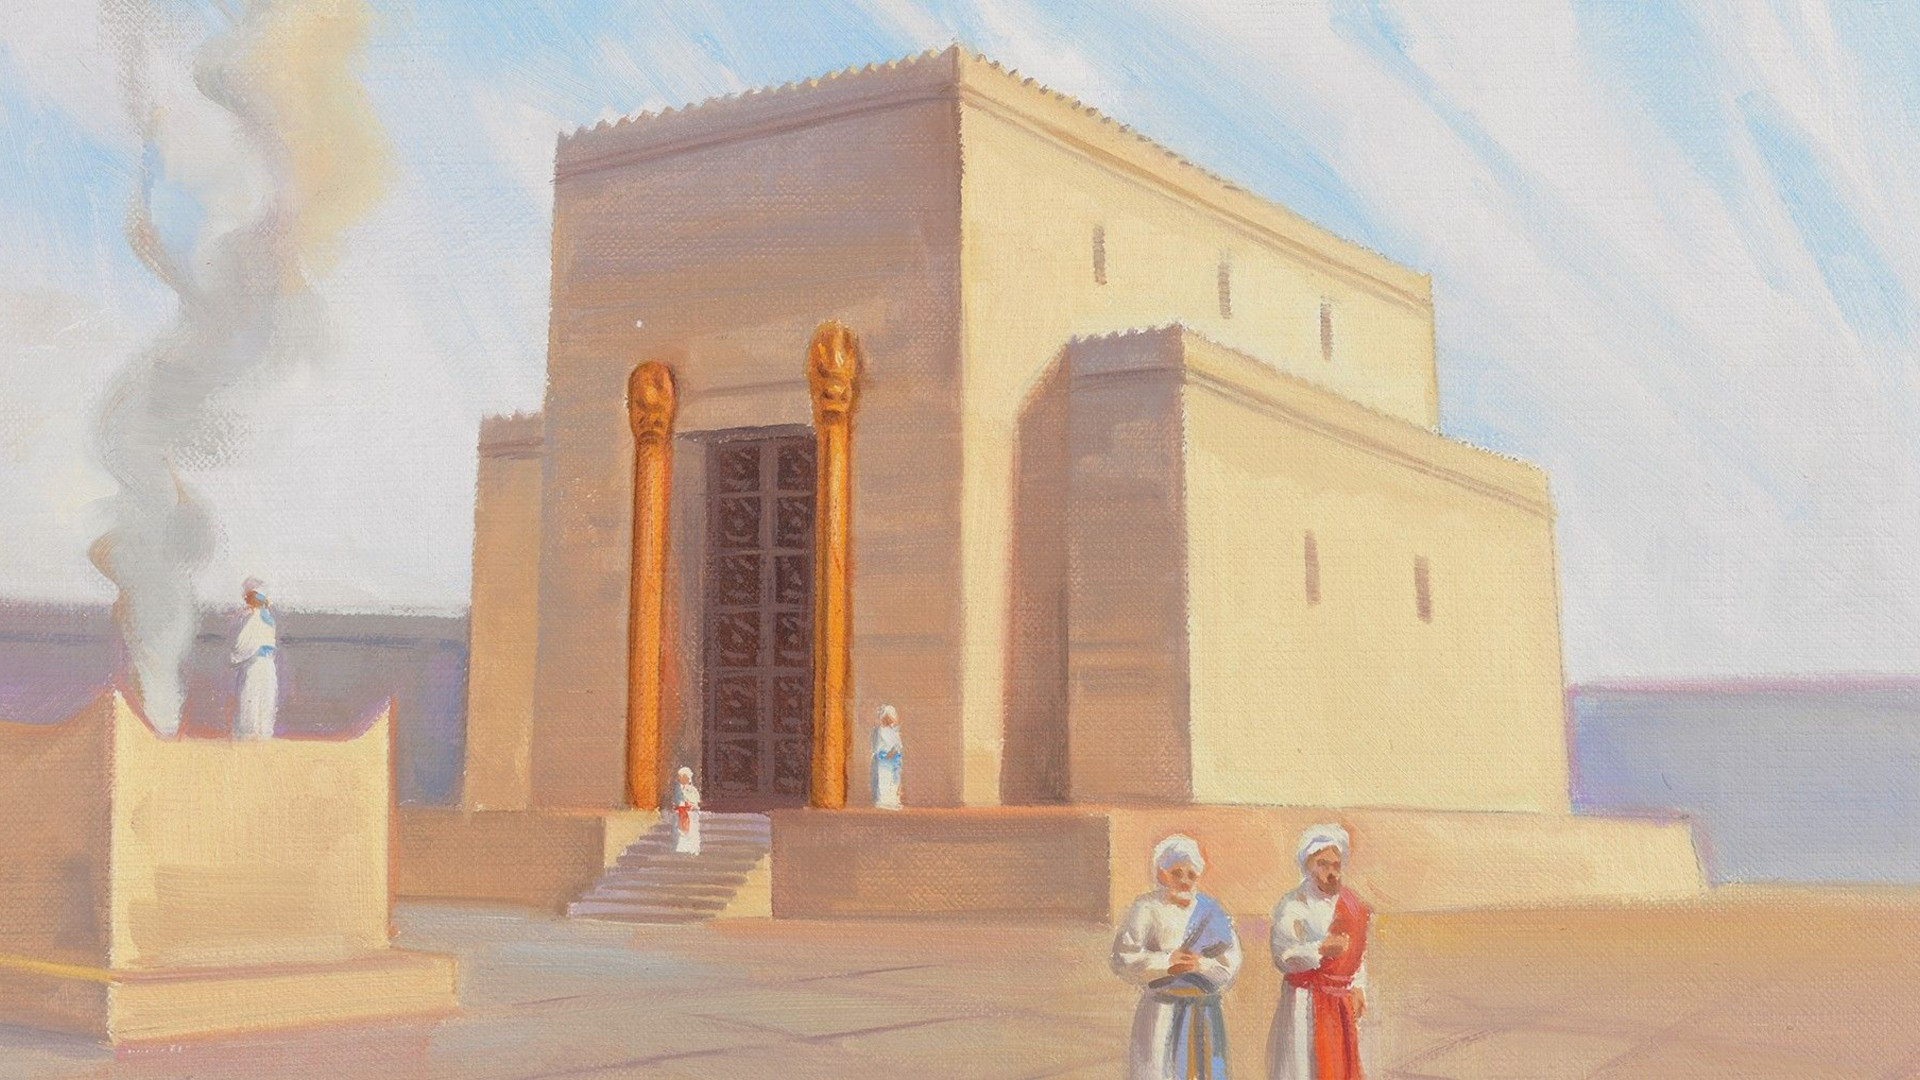 Illustration of the temple of Zerubbabel, by Sam Lawlor